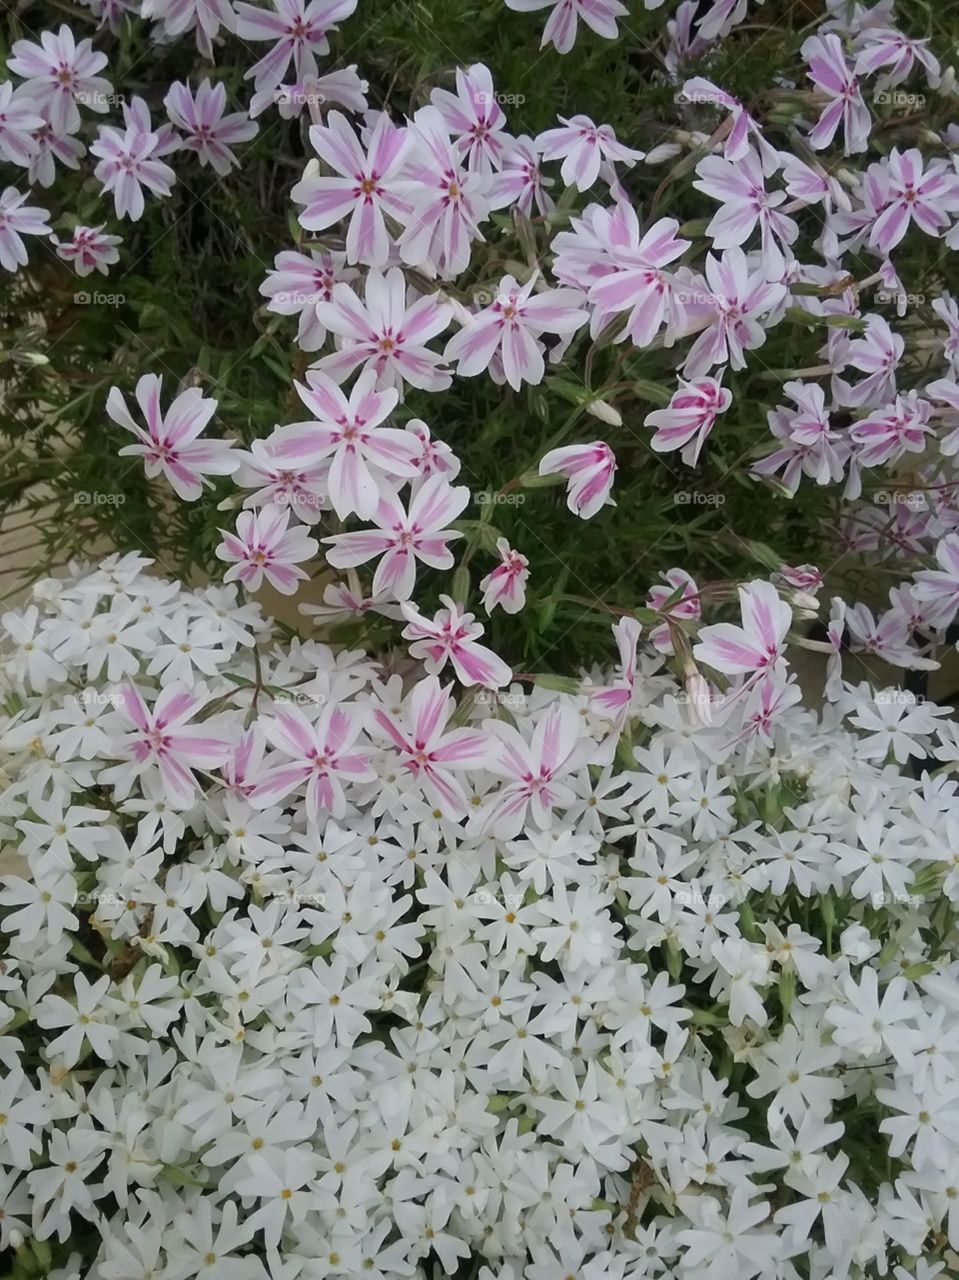 Close-up of Perennial pink and white striped Phlox getting friendly with its pure white Phlox neighbor